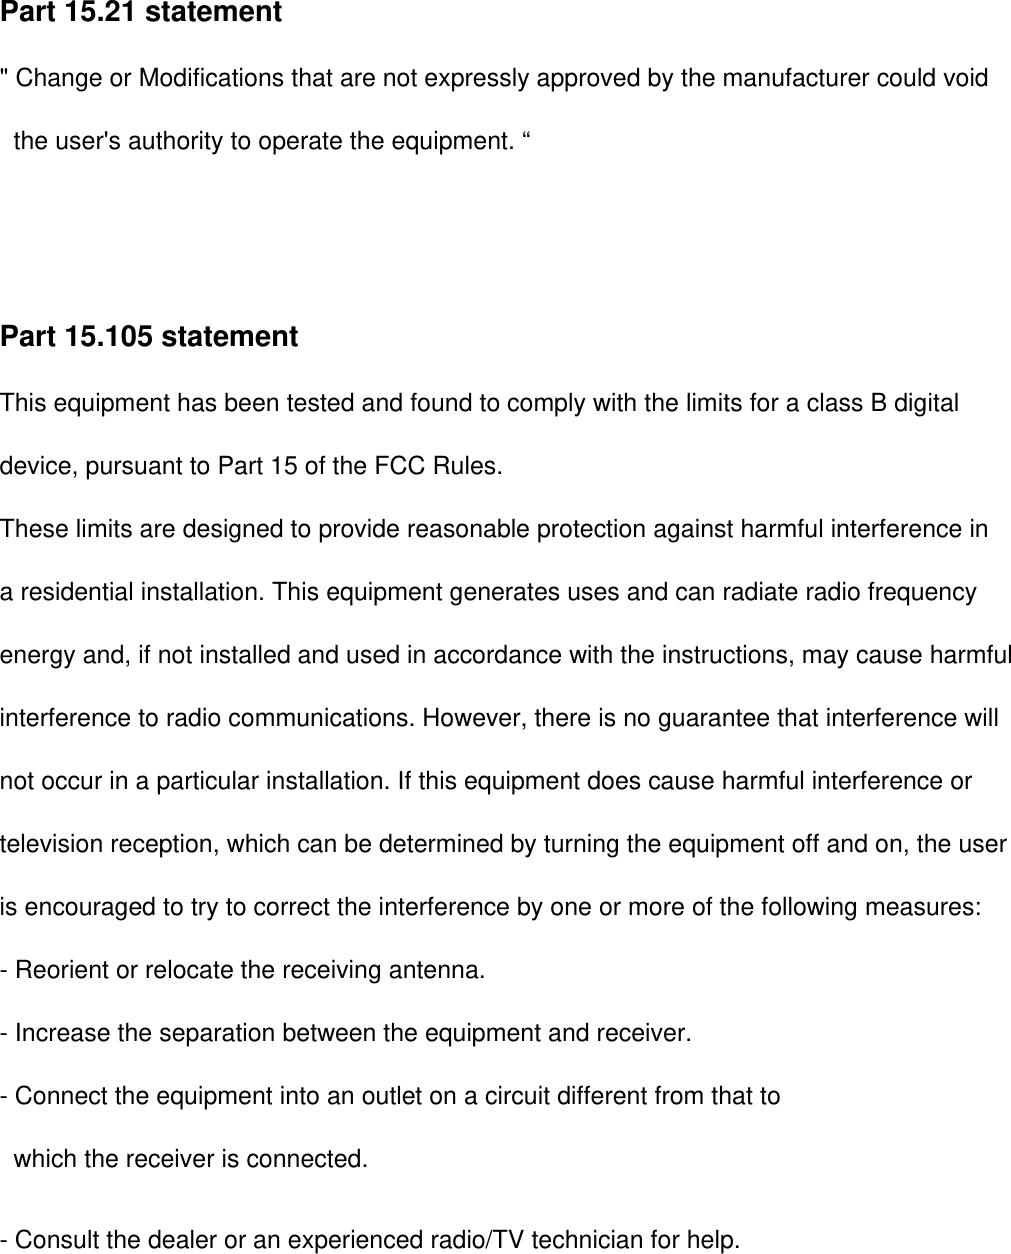 Part 15.21 statement&quot; Change or Modifications that are not expressly approved by the manufacturer could void        the user&apos;s authority to operate the equipment. “Part 15.105 statement This equipment has been tested and found to comply with the limits for a class B digitaldevice, pursuant to Part 15 of the FCC Rules. These limits are designed to provide reasonable protection against harmful interference in a residential installation. This equipment generates uses and can radiate radio frequency energy and, if not installed and used in accordance with the instructions, may cause harmfulinterference to radio communications. However, there is no guarantee that interference willnot occur in a particular installation. If this equipment does cause harmful interference or television reception, which can be determined by turning the equipment off and on, the user is encouraged to try to correct the interference by one or more of the following measures:- Reorient or relocate the receiving antenna.- Increase the separation between the equipment and receiver.- Connect the equipment into an outlet on a circuit different from that towhich the receiver is connected.- Consult the dealer or an experienced radio/TV technician for help.This device is not intended for sale in the USA.